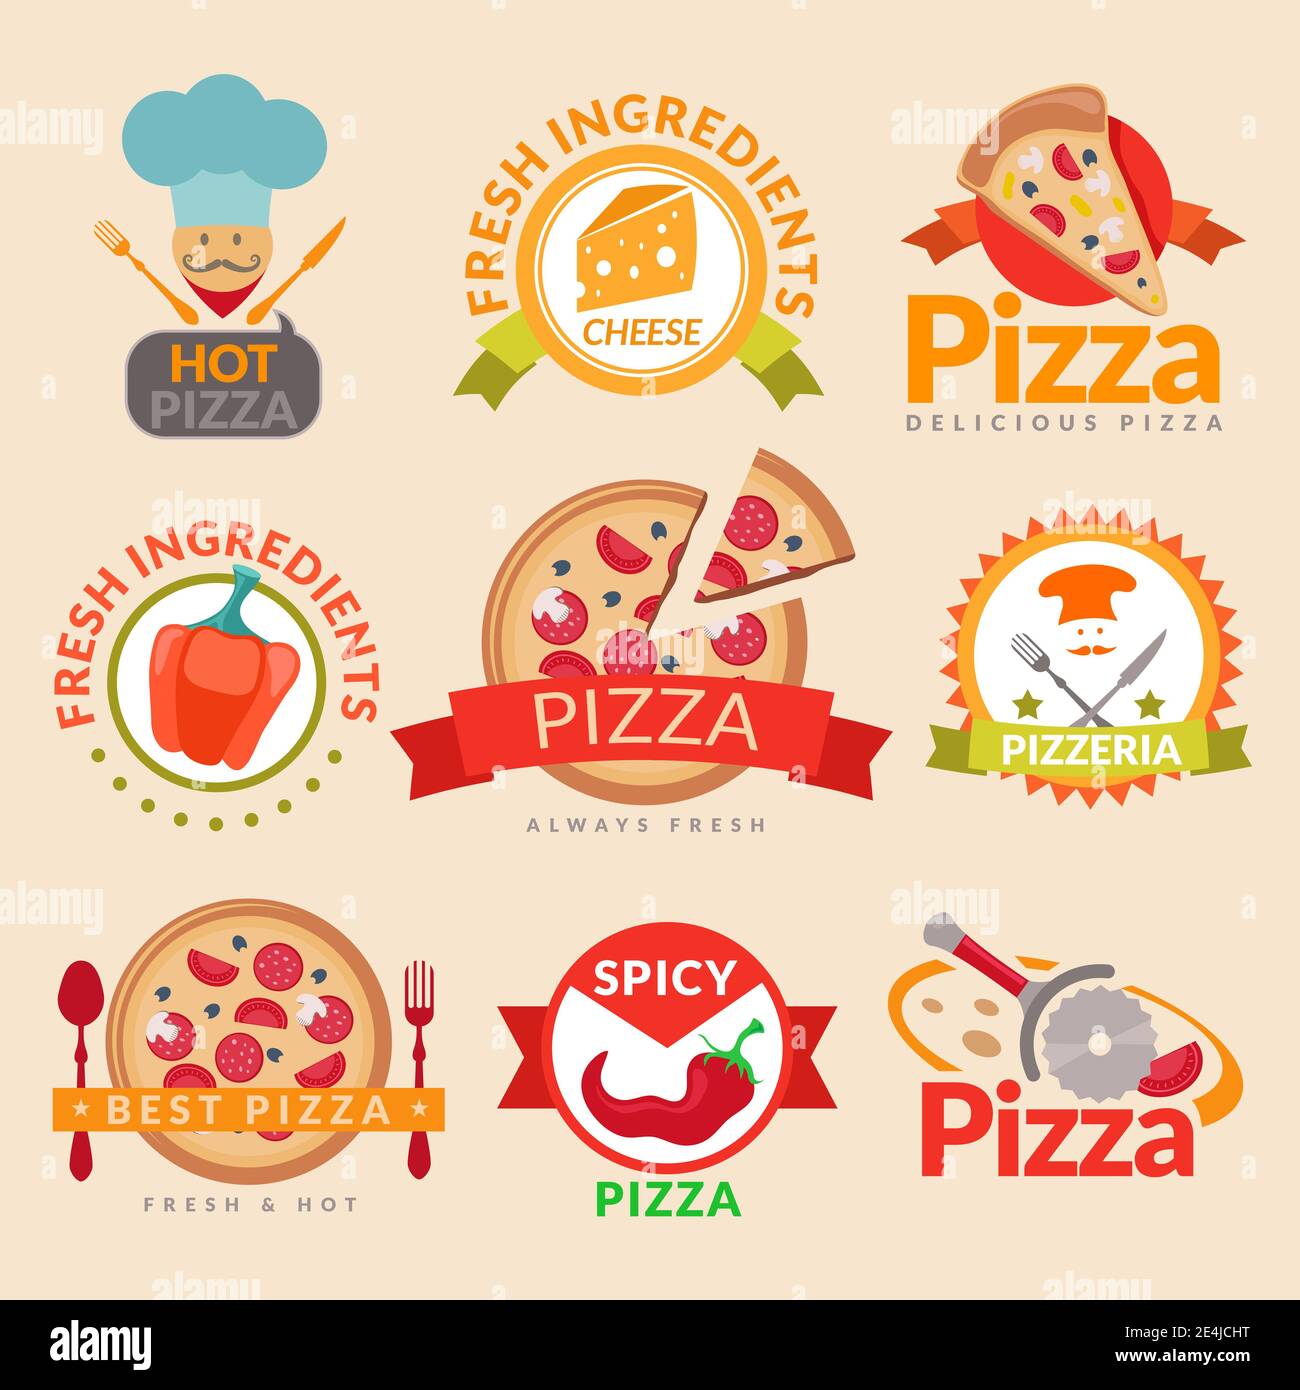 Pizzeria hot pizza fresh ingredients spicy delicious food label